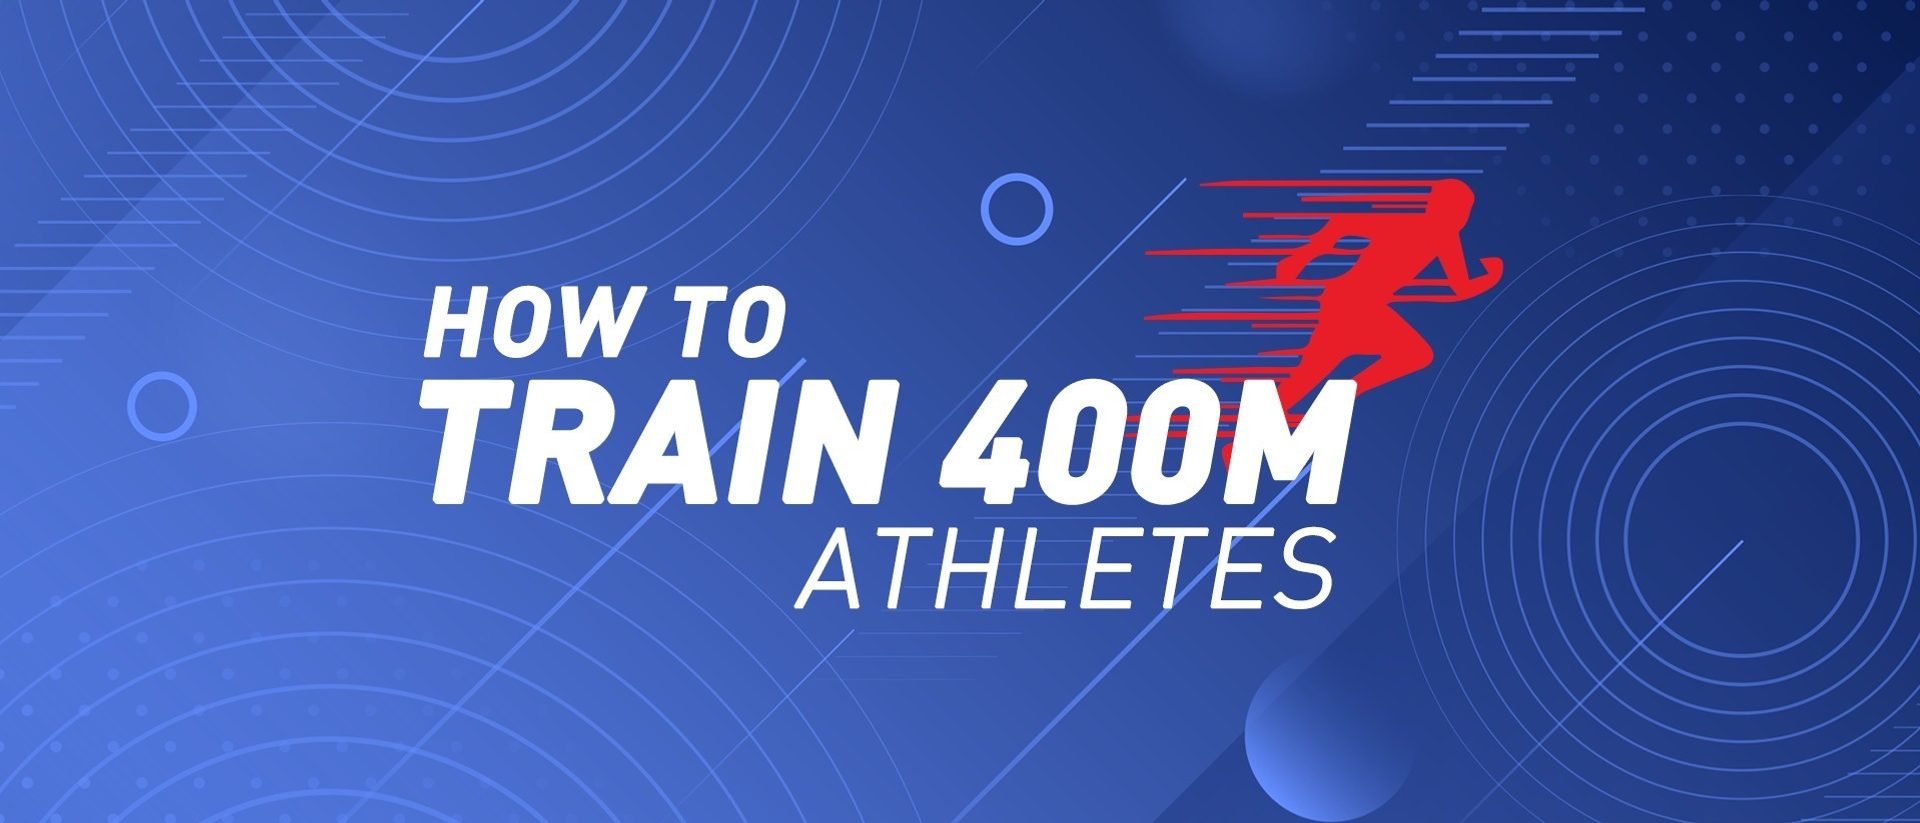 400m Training for Young Athletes 